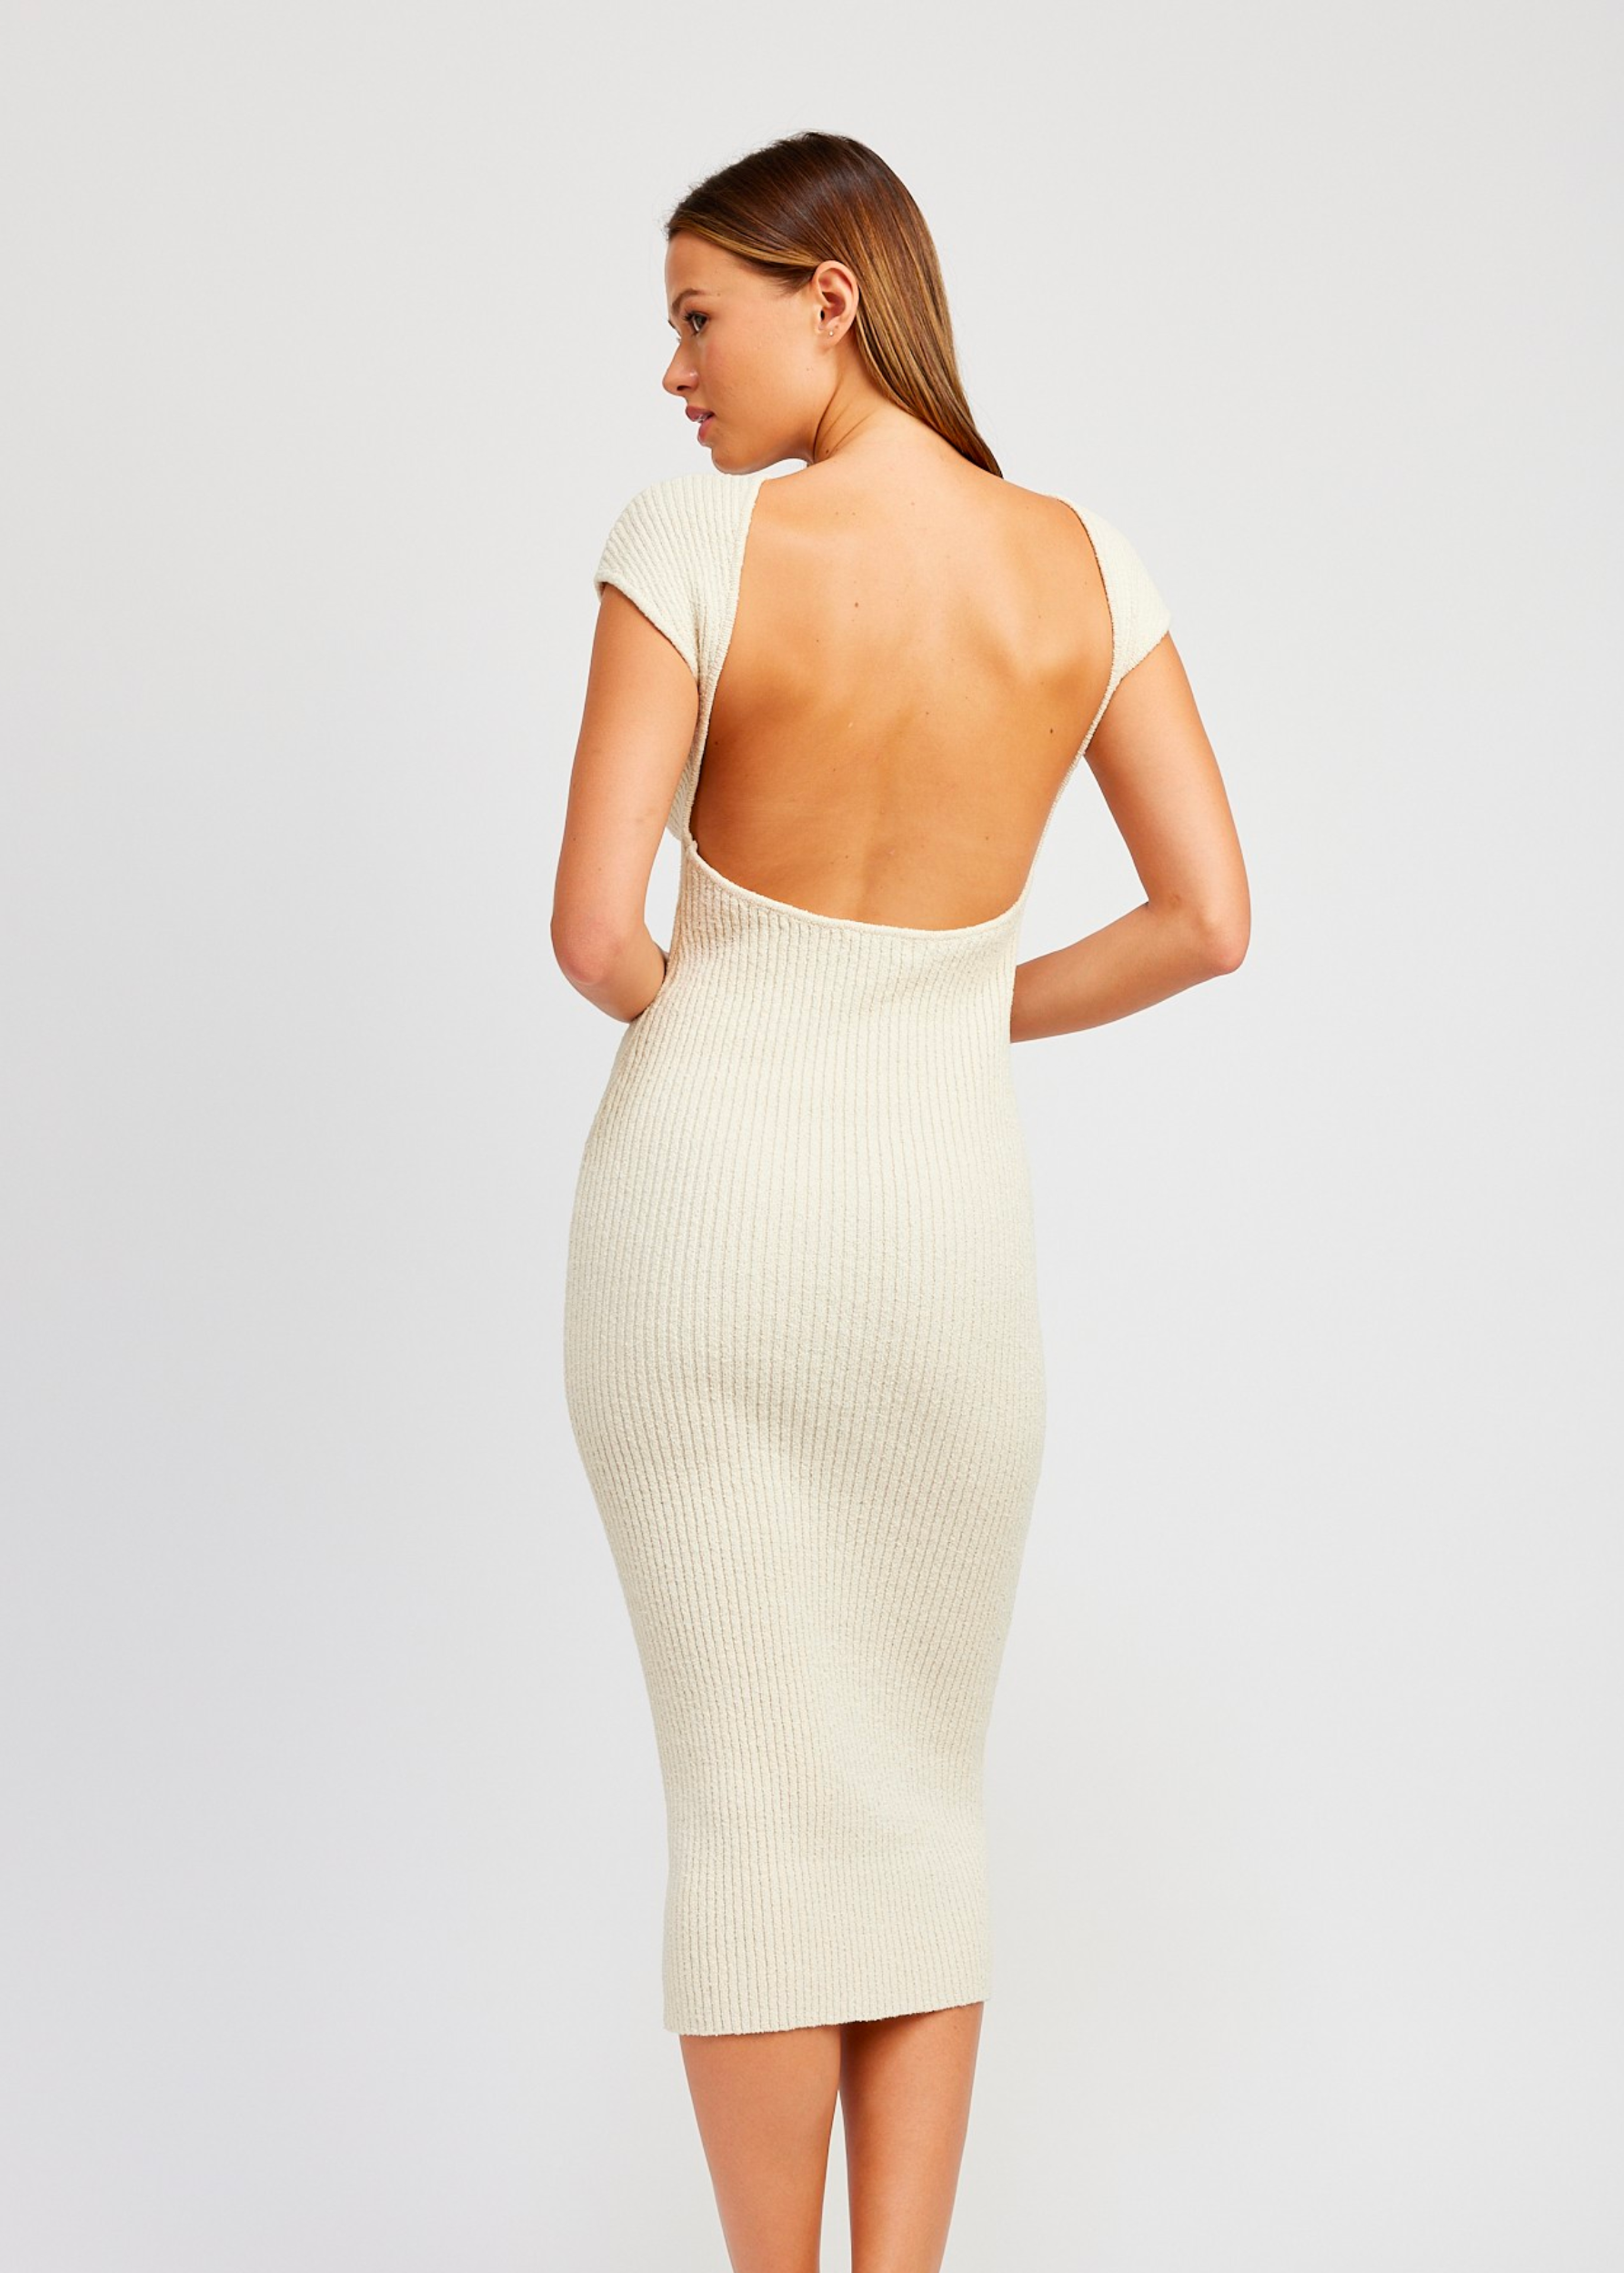 CAP SLEEVE BODYCON DRESS WITH OPEN BACK